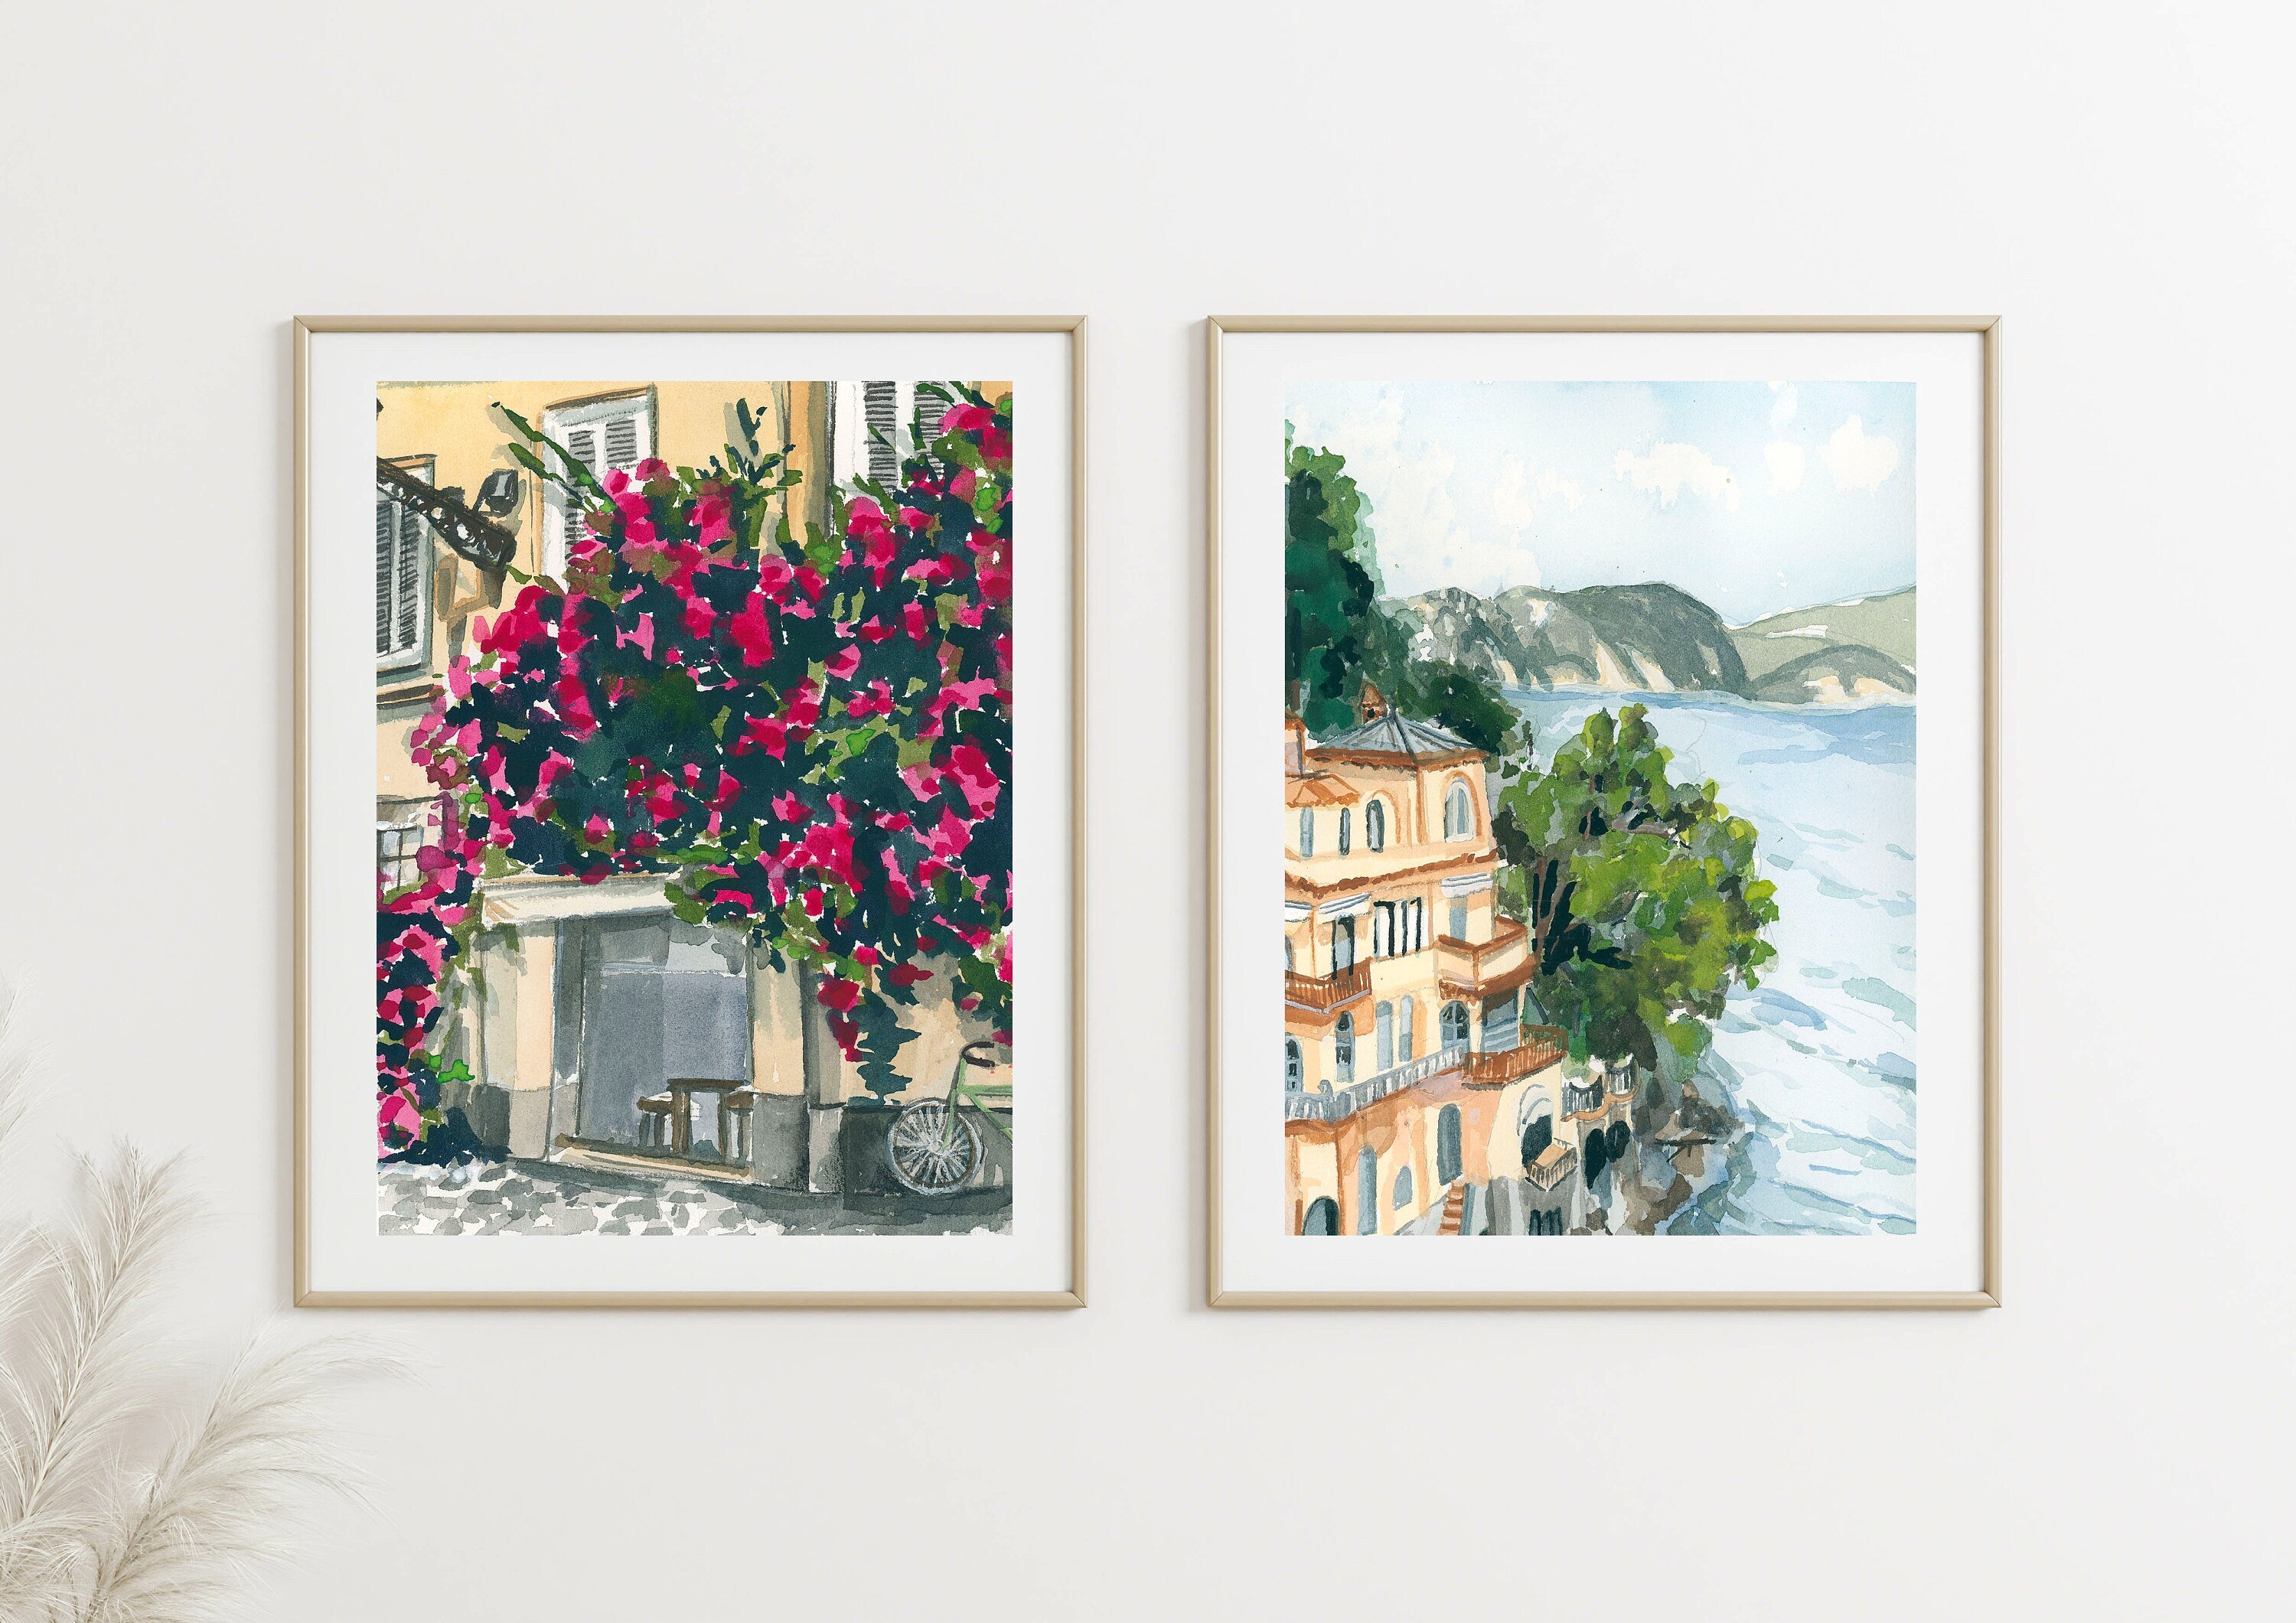 Italian streetscape with flowers print of painting by Medjool studio. Print of original gouache painting featuring an Italian building covered with beautiful pink flowers.